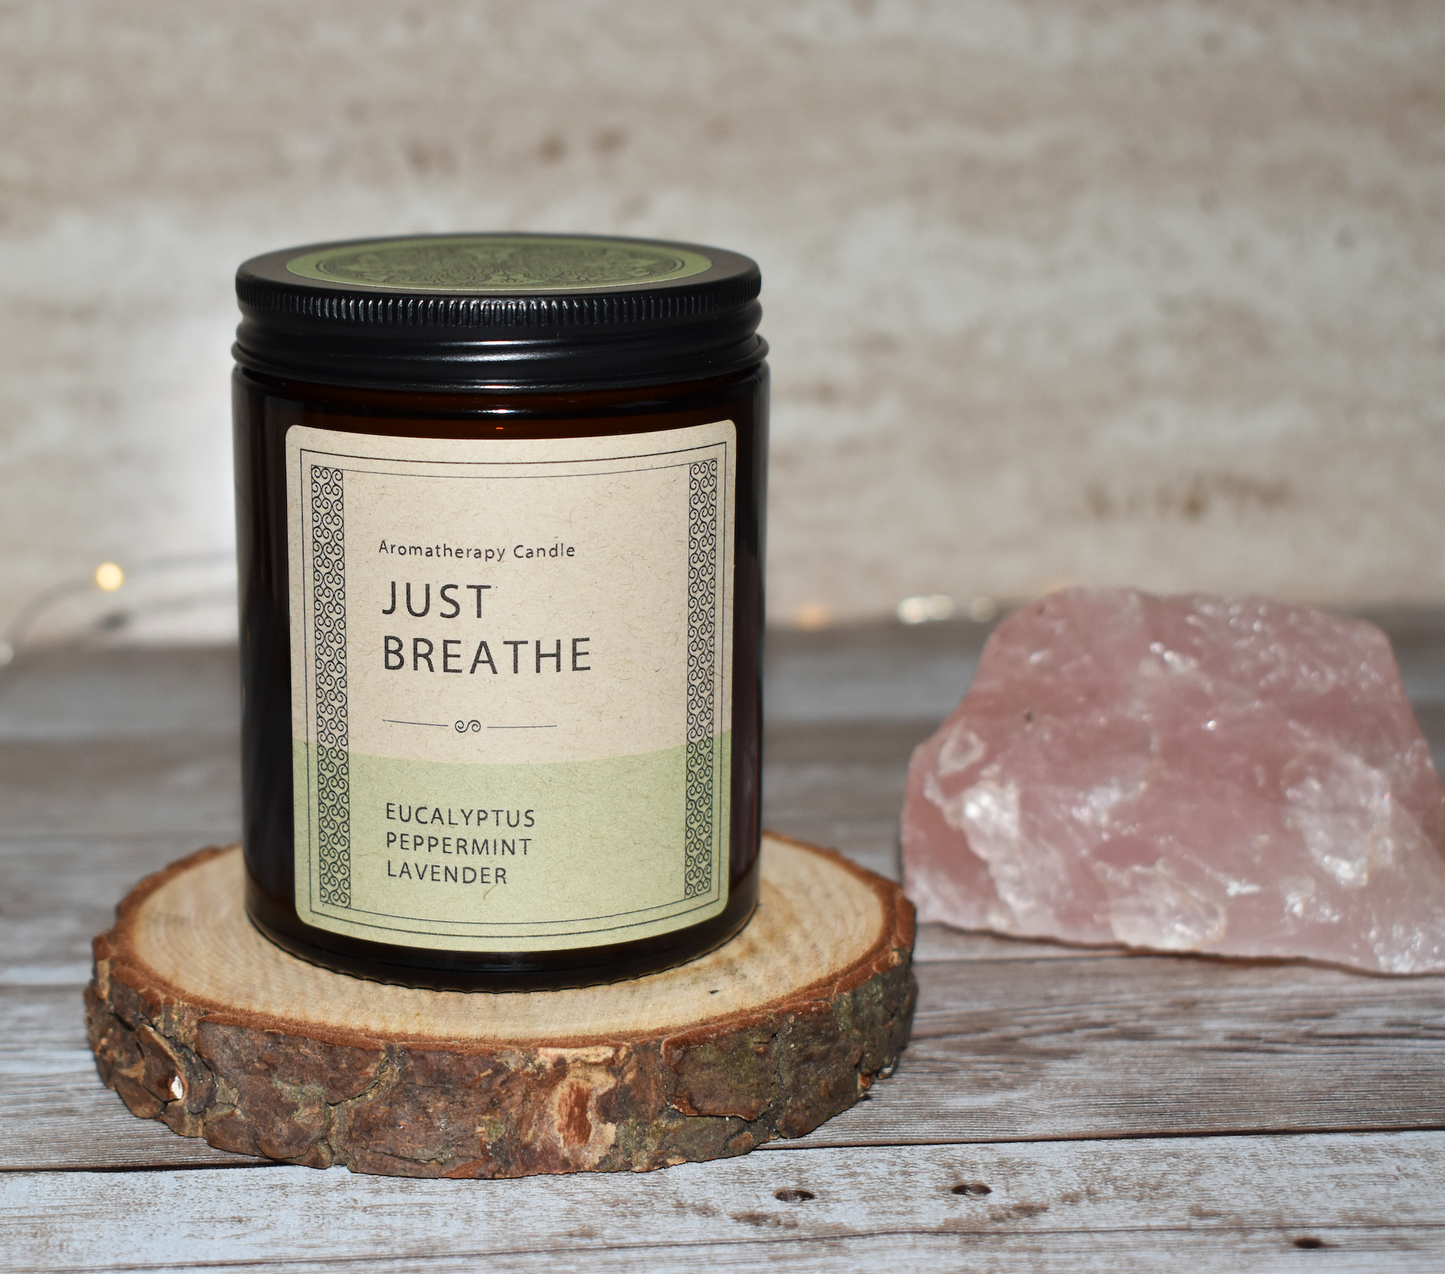 Inhale Relaxation: "Just Breathe" Aromatherapy Candle with Eucalyptus, Peppermint, and Lavender Essential Oils